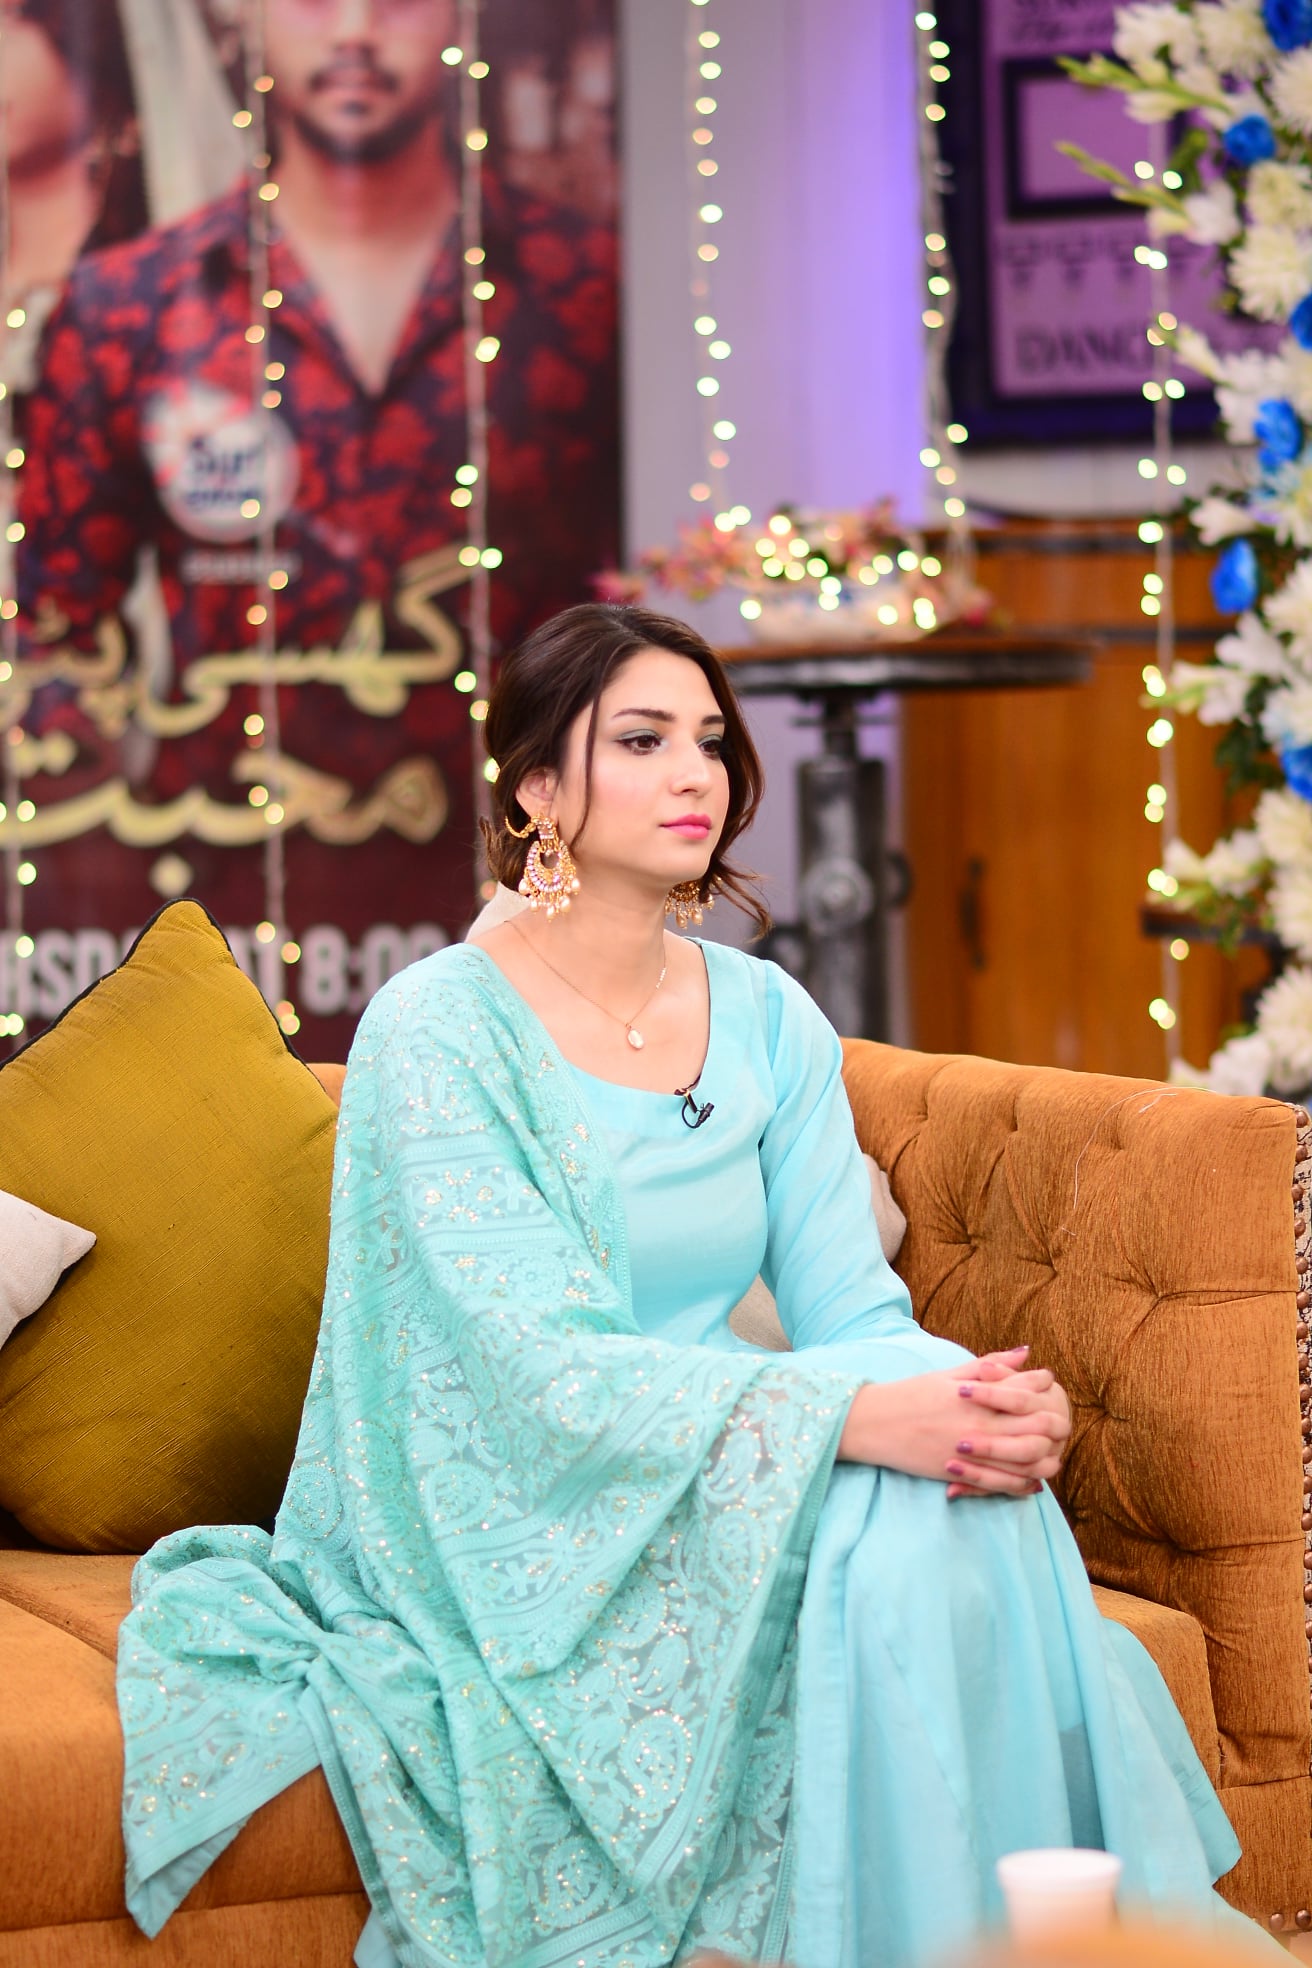 Actor Ali Abbas and Ramsha Khan Pictures from Nida Yasir Morning Show